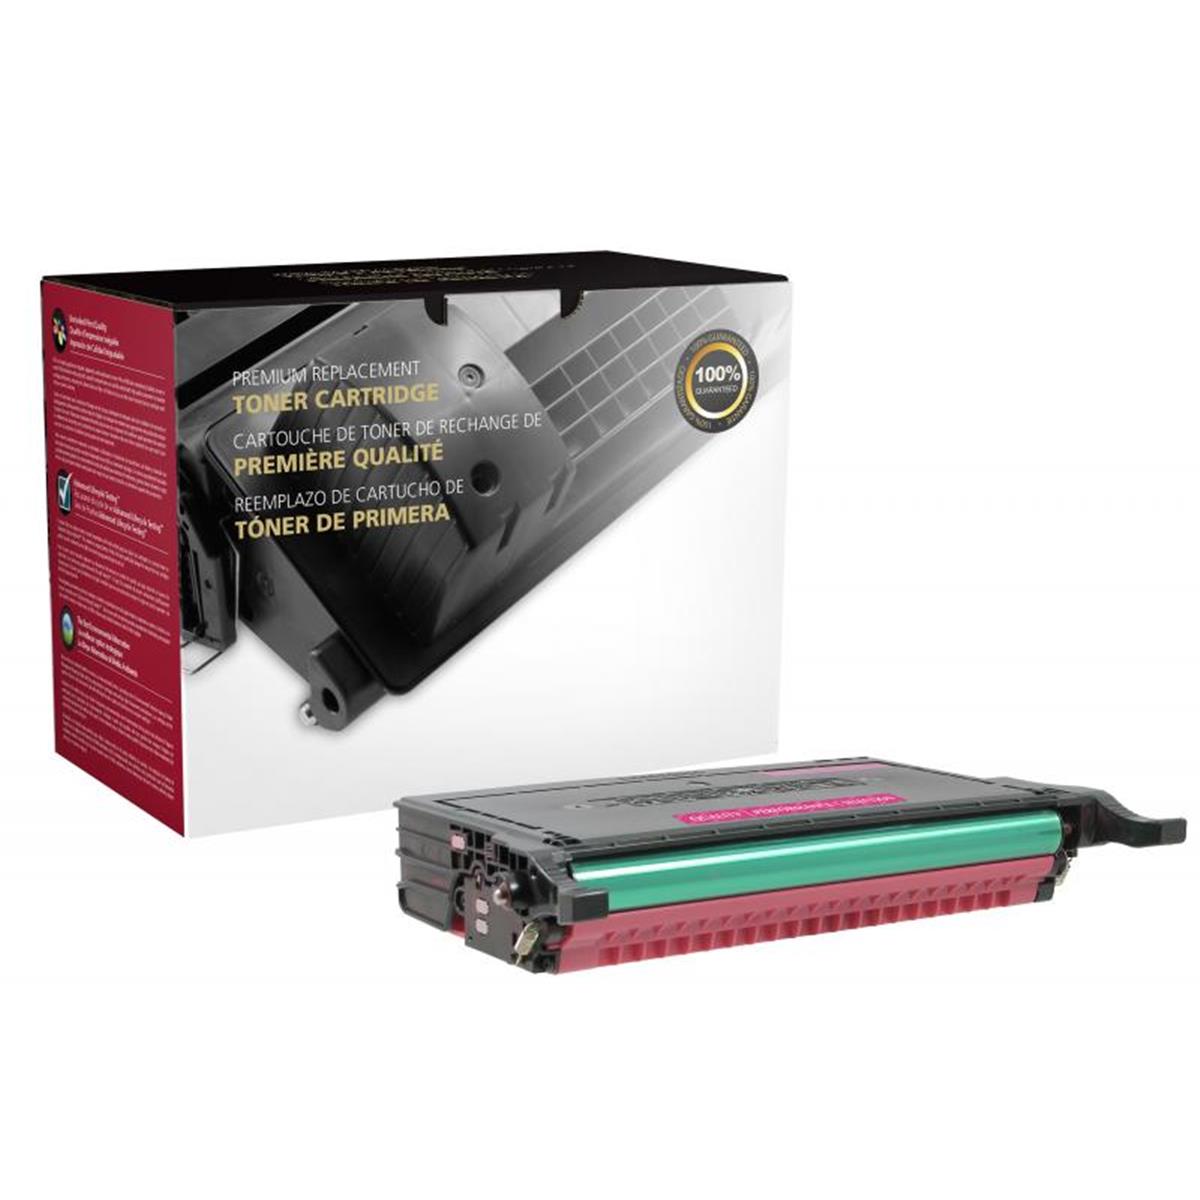 Picture of Dell 200535 High Yield Magenta Toner Cartridge for Dell 2145